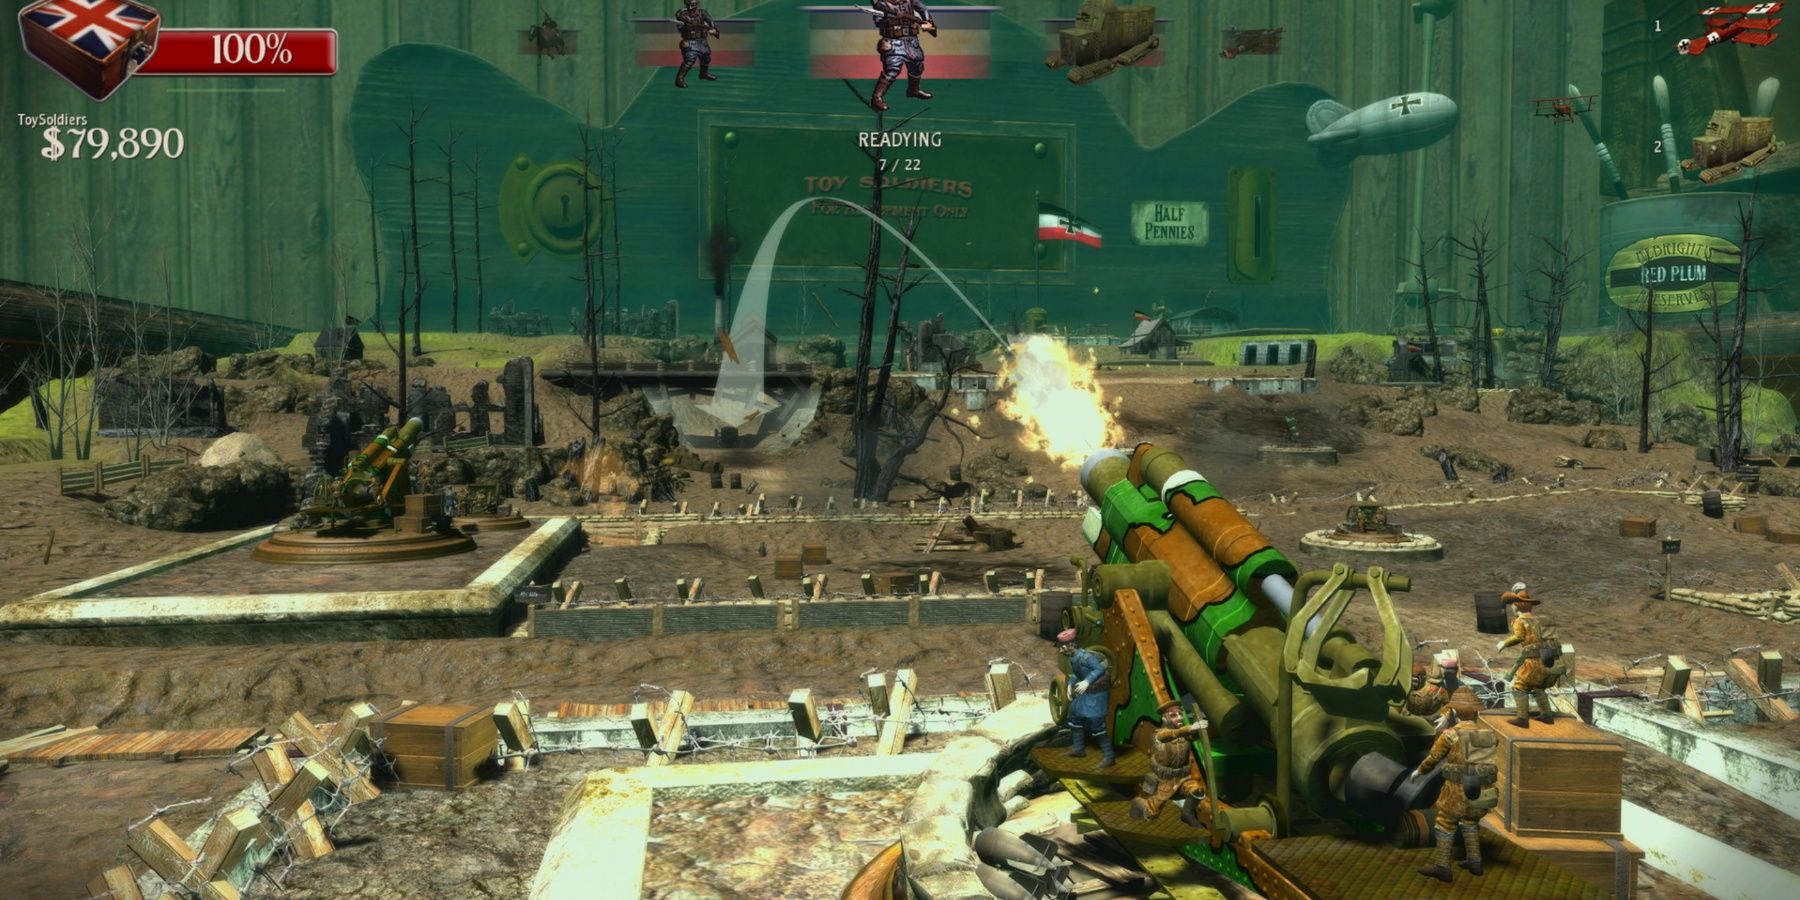 Toy Soldiers manning a toy gun and firing on to the battlefield as a plastic blimp flies in the background